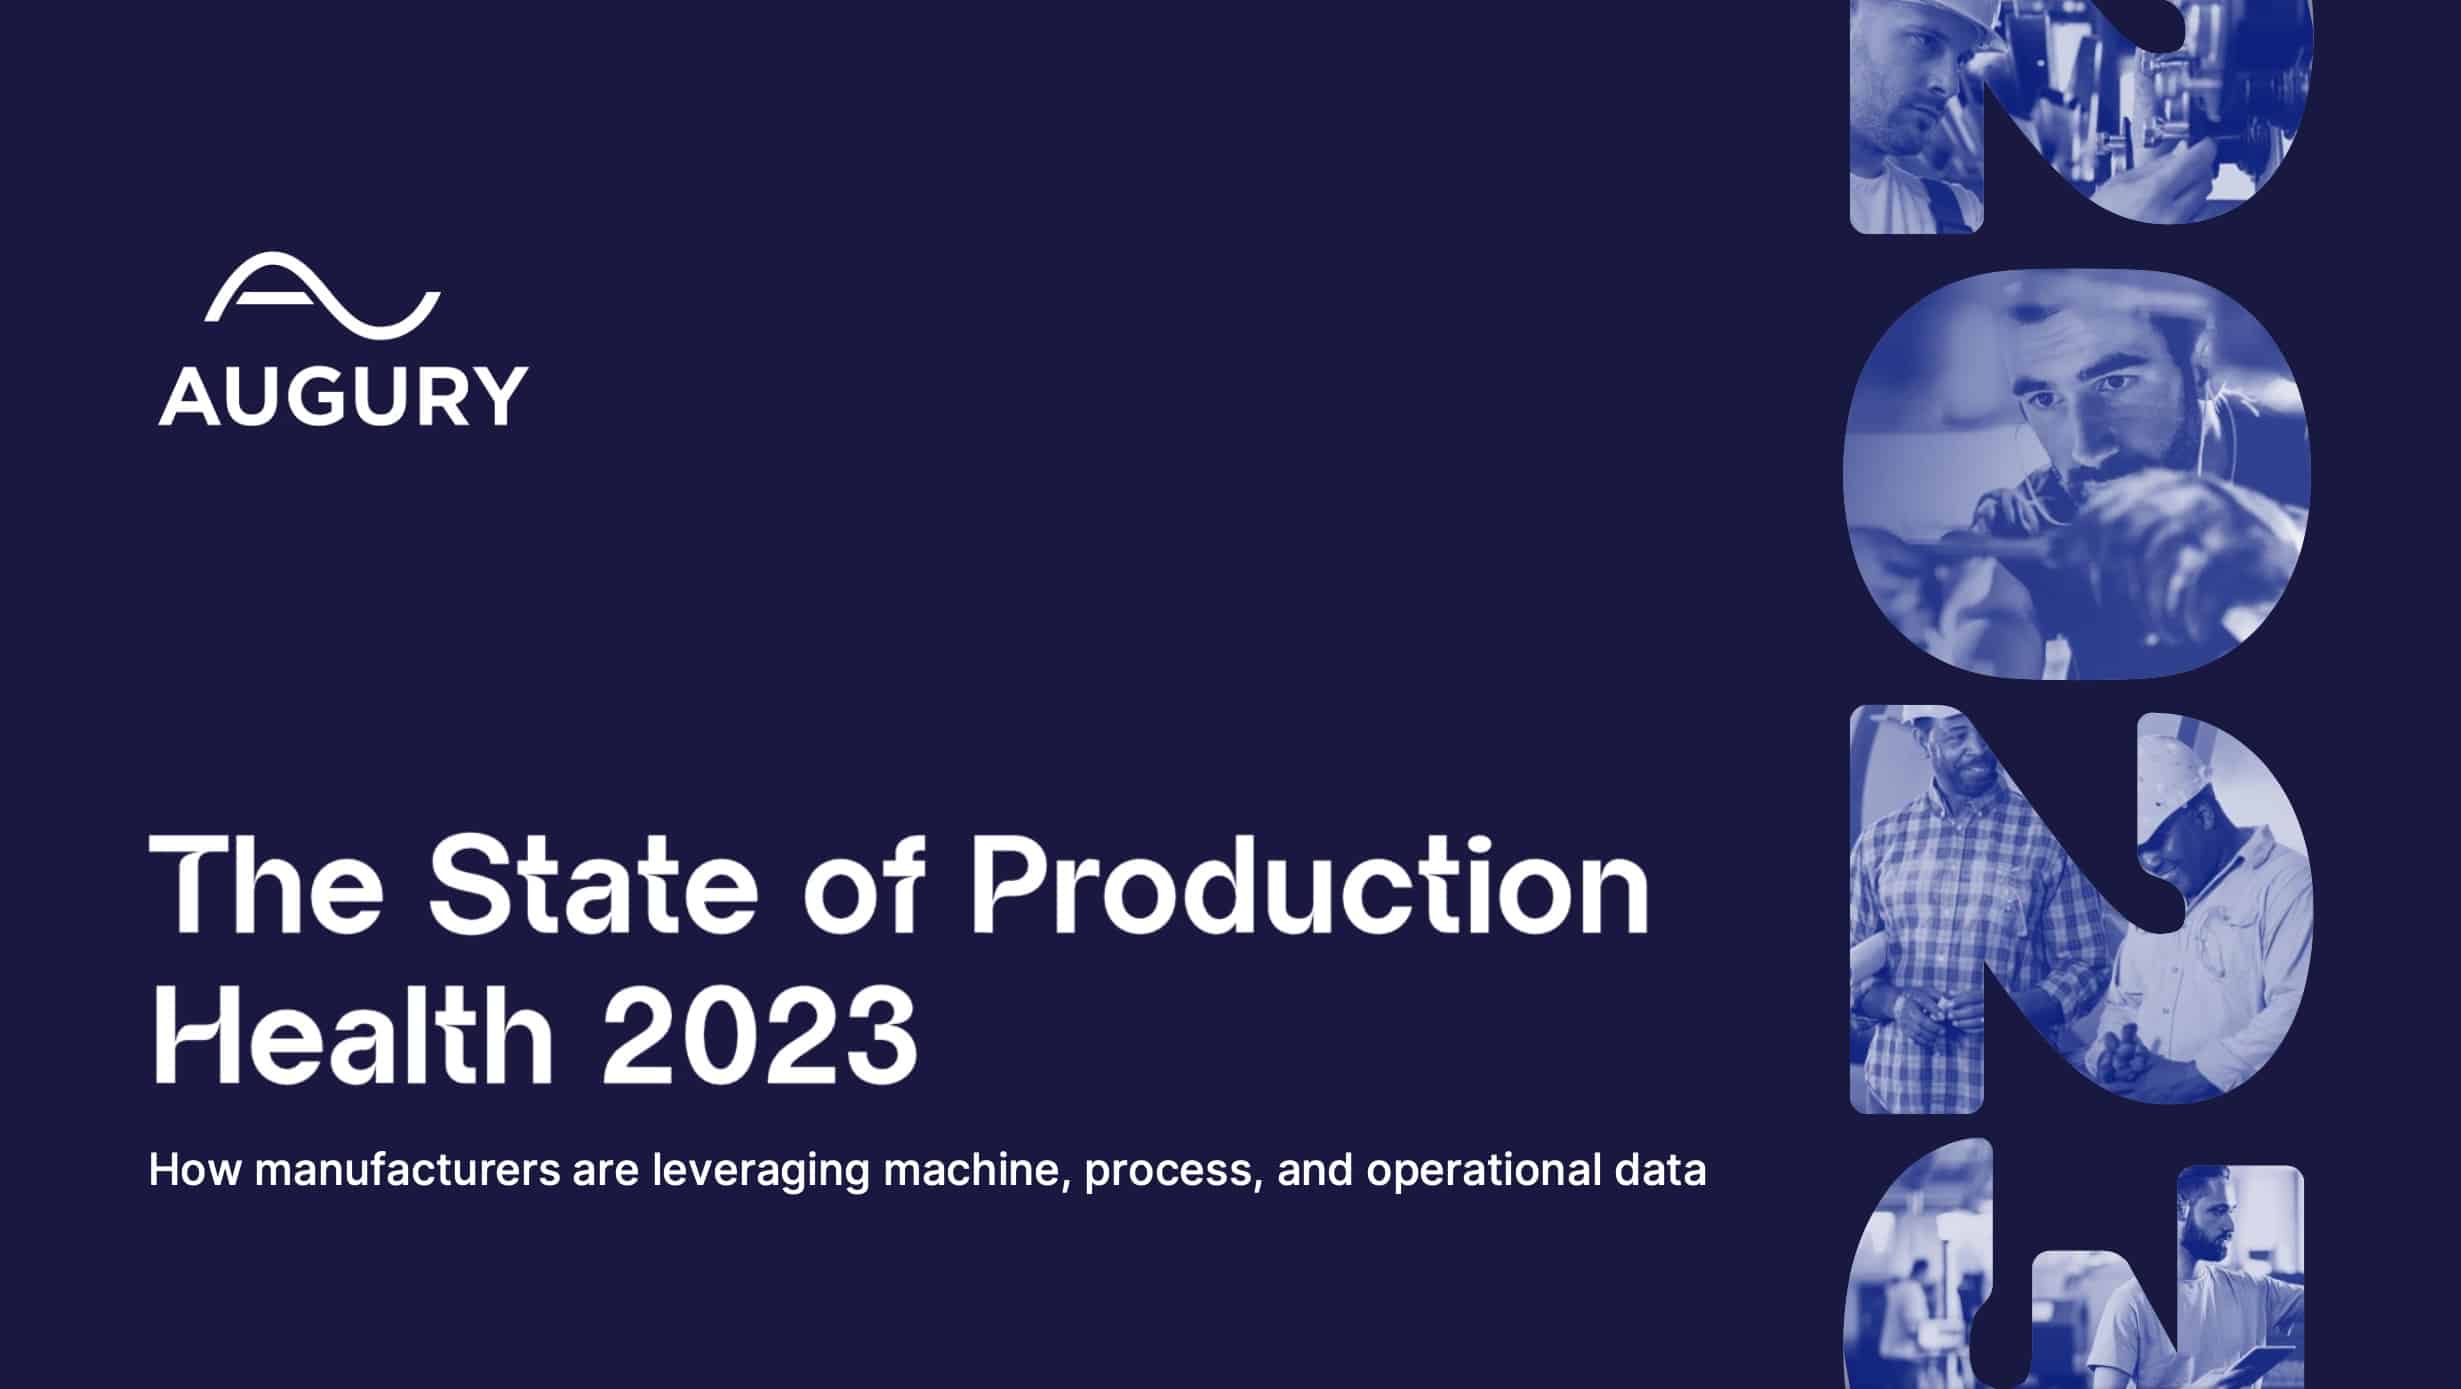 The State of Production Health 2023